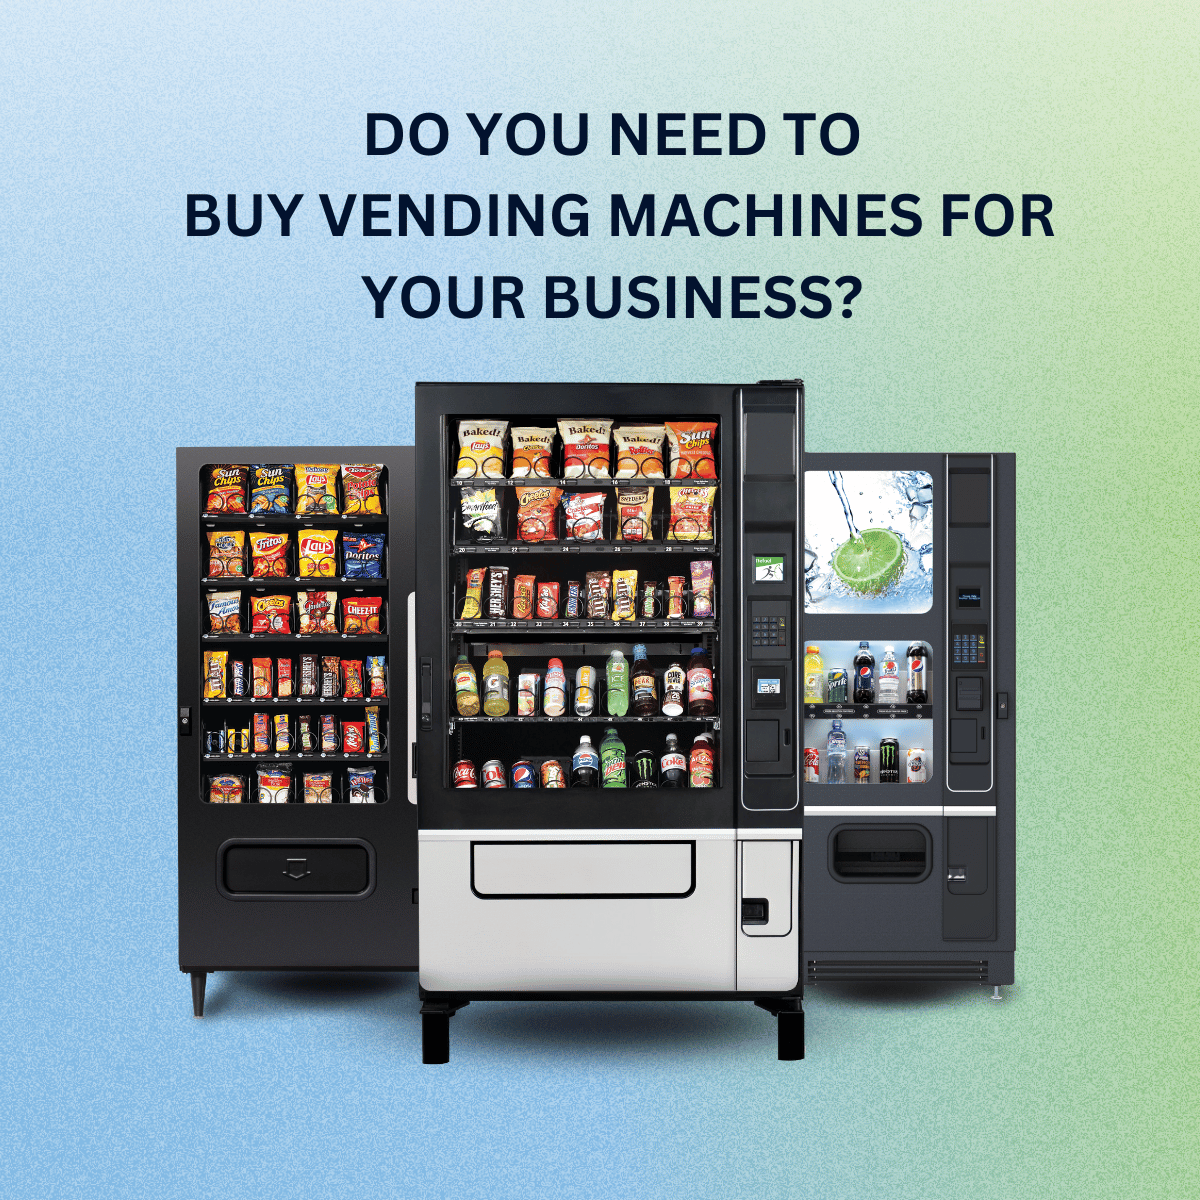 DO YOU NEED TO BUY VENDING MACHINES FOR YOUR BUSINESS?